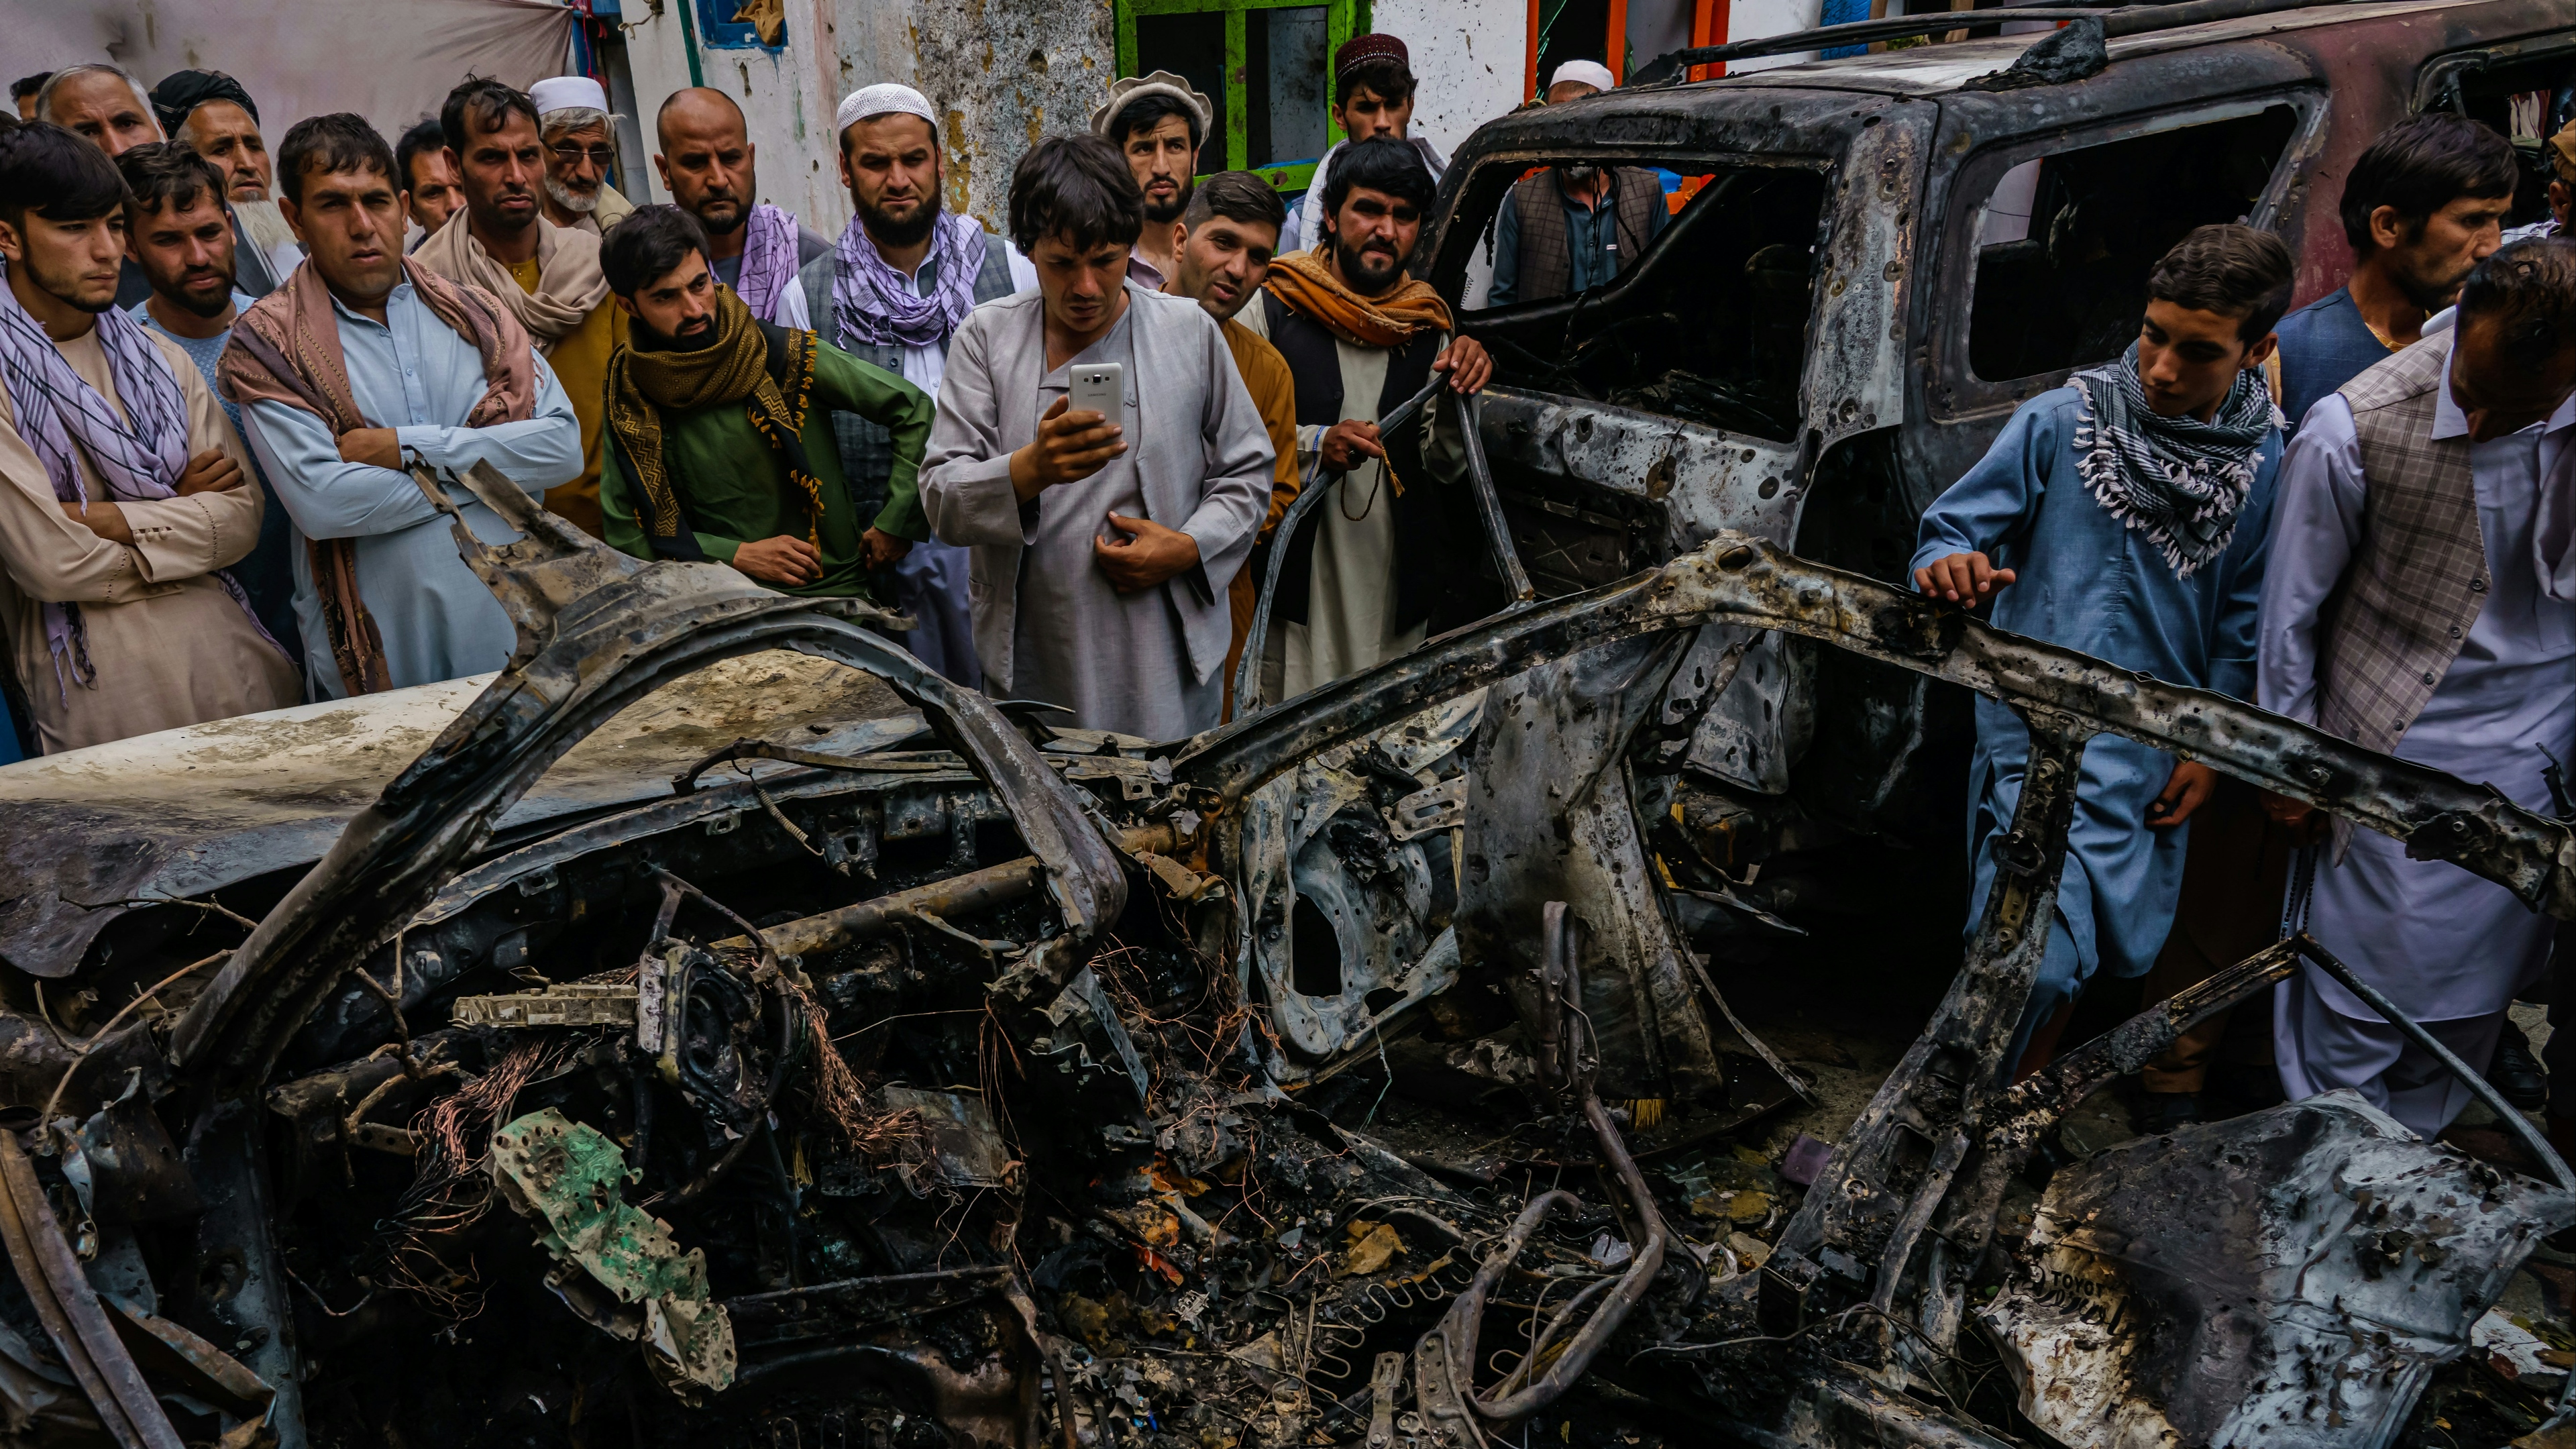 Relatives and neighbors gathered around the incinerated husk of a vehicle targeted and hit by an American drone strike, in Kabul, Afghanistan.